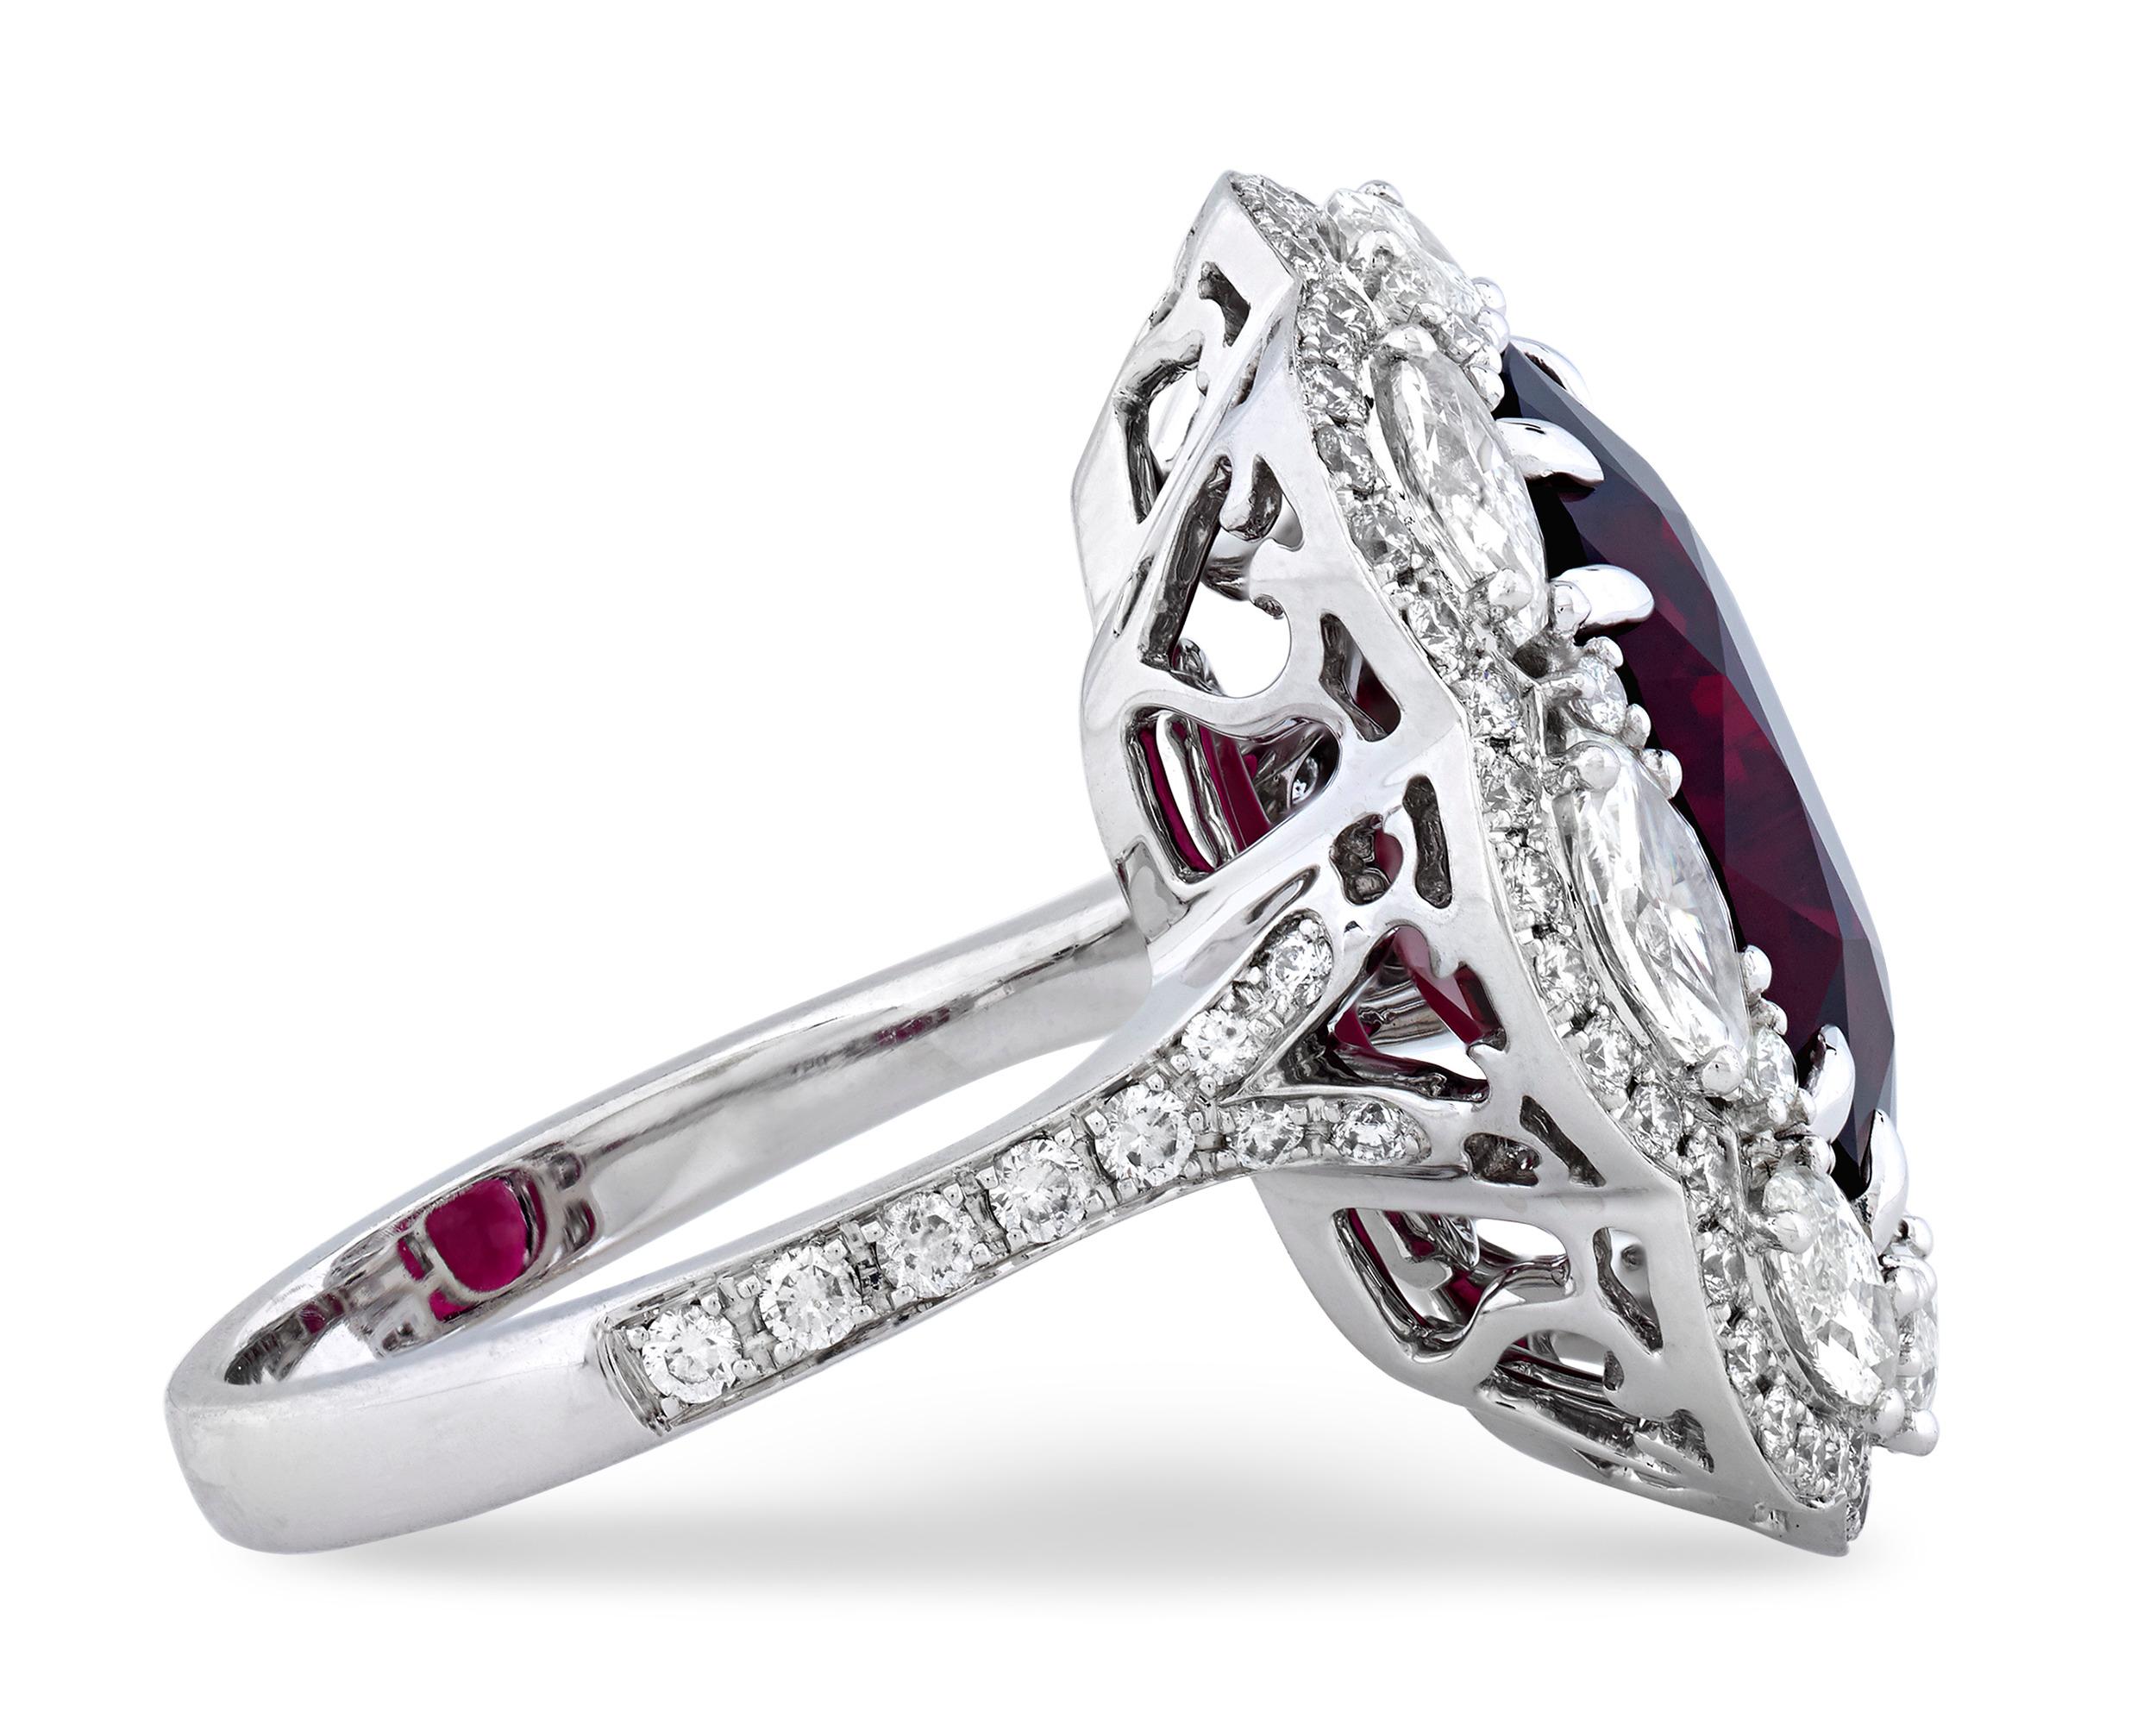 A rare rubellite tourmaline with a richly saturated crimson hue is at the center of this eye-catching cocktail ring. Weighing 9.52 carats, the cushion-cut gemstone is encircled by a halo of round and marquise-cut diamonds totaling 2.10 carats. Set